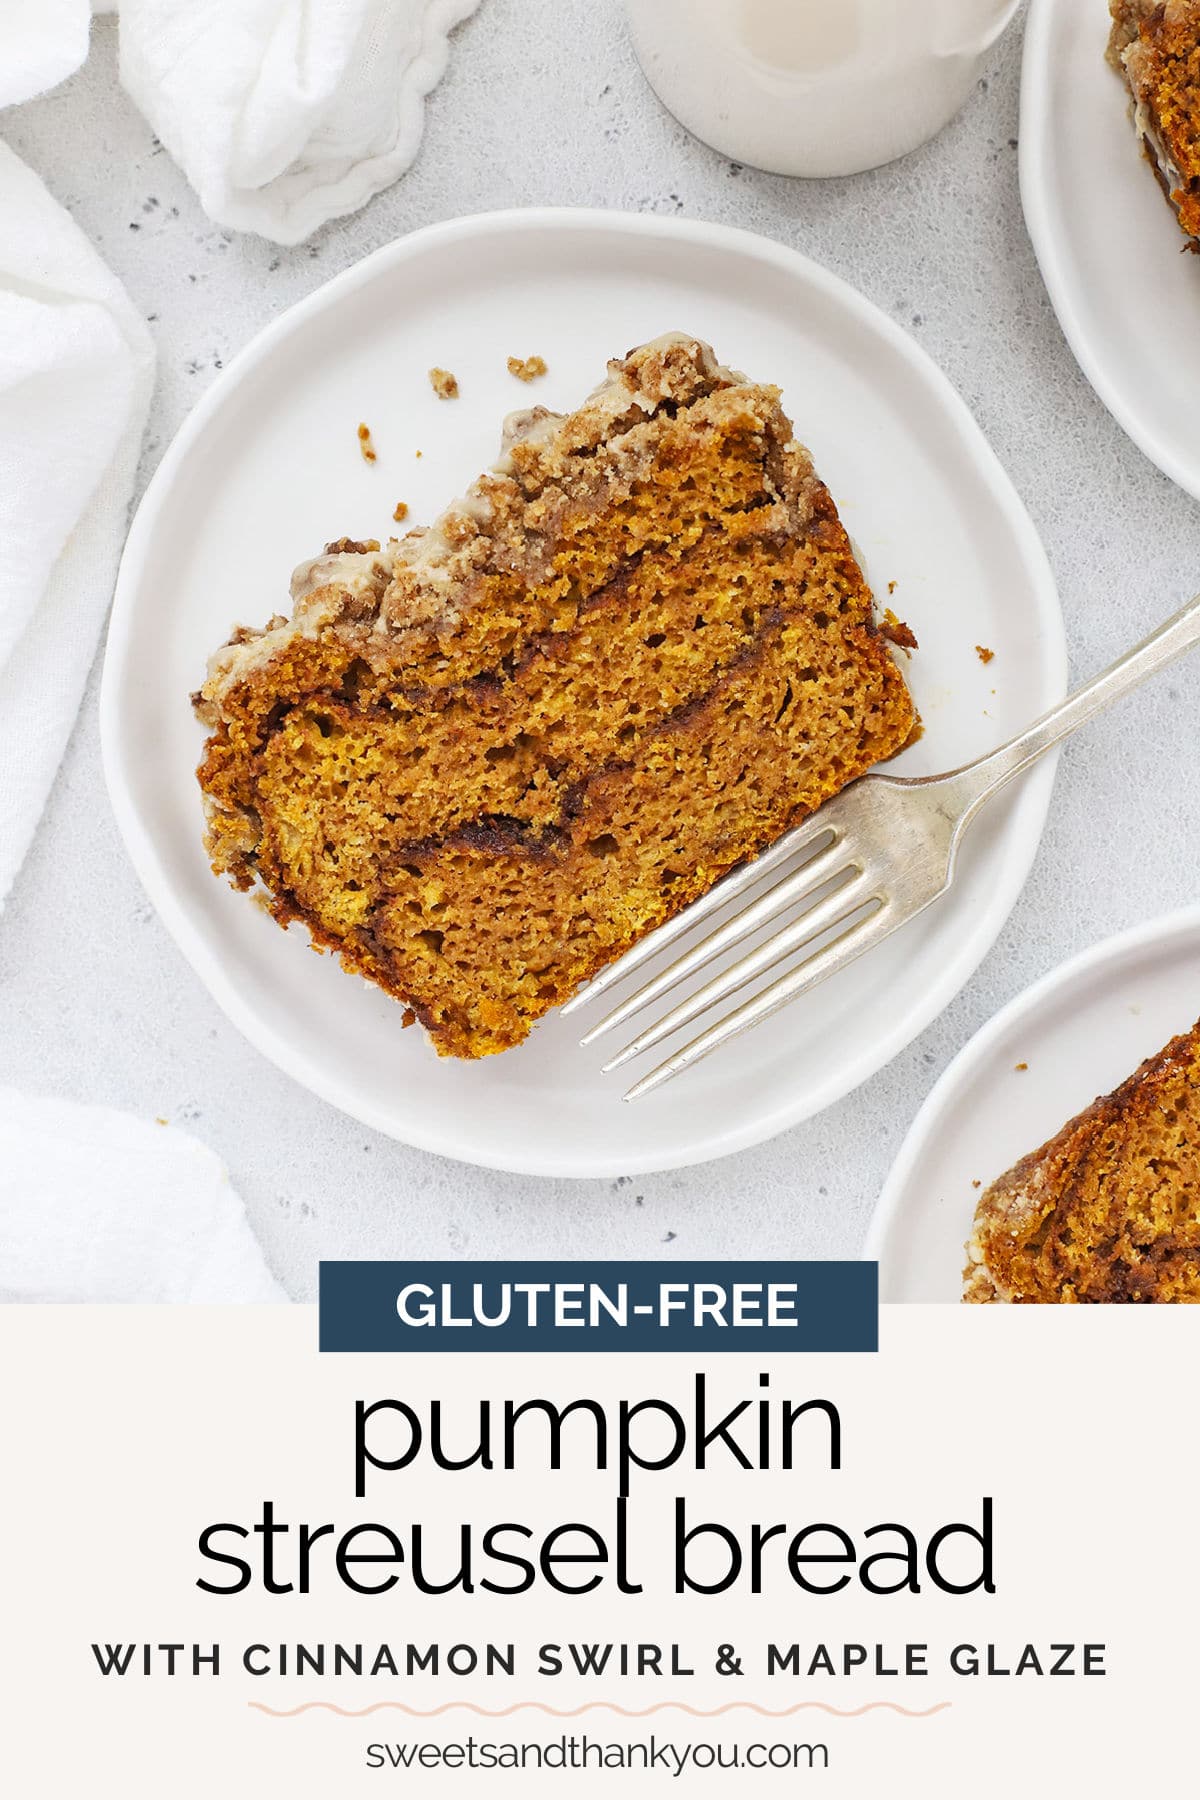 Gluten-Free Pumpkin Streusel Bread With Maple Glaze - This amazing gluten-free cinnamon swirl pumpkin bread is topped with a buttery crumble and sweet maple glaze. It's THE BEST gluten-free pumpkin bread recipe ever! // Cinnamon Swirl Pumpkin Bread Recipe // Maple Pumpkin Bread // Maple Glaze Pumpkin Bread // Glazed Pumpkin Bread // Gluten-Free Quick Bread #pumpkinbread #streusel #mapleglaze #glutenfreepumpkin #glutenfreebaking #glutenfreebread #glutenfreequickbread